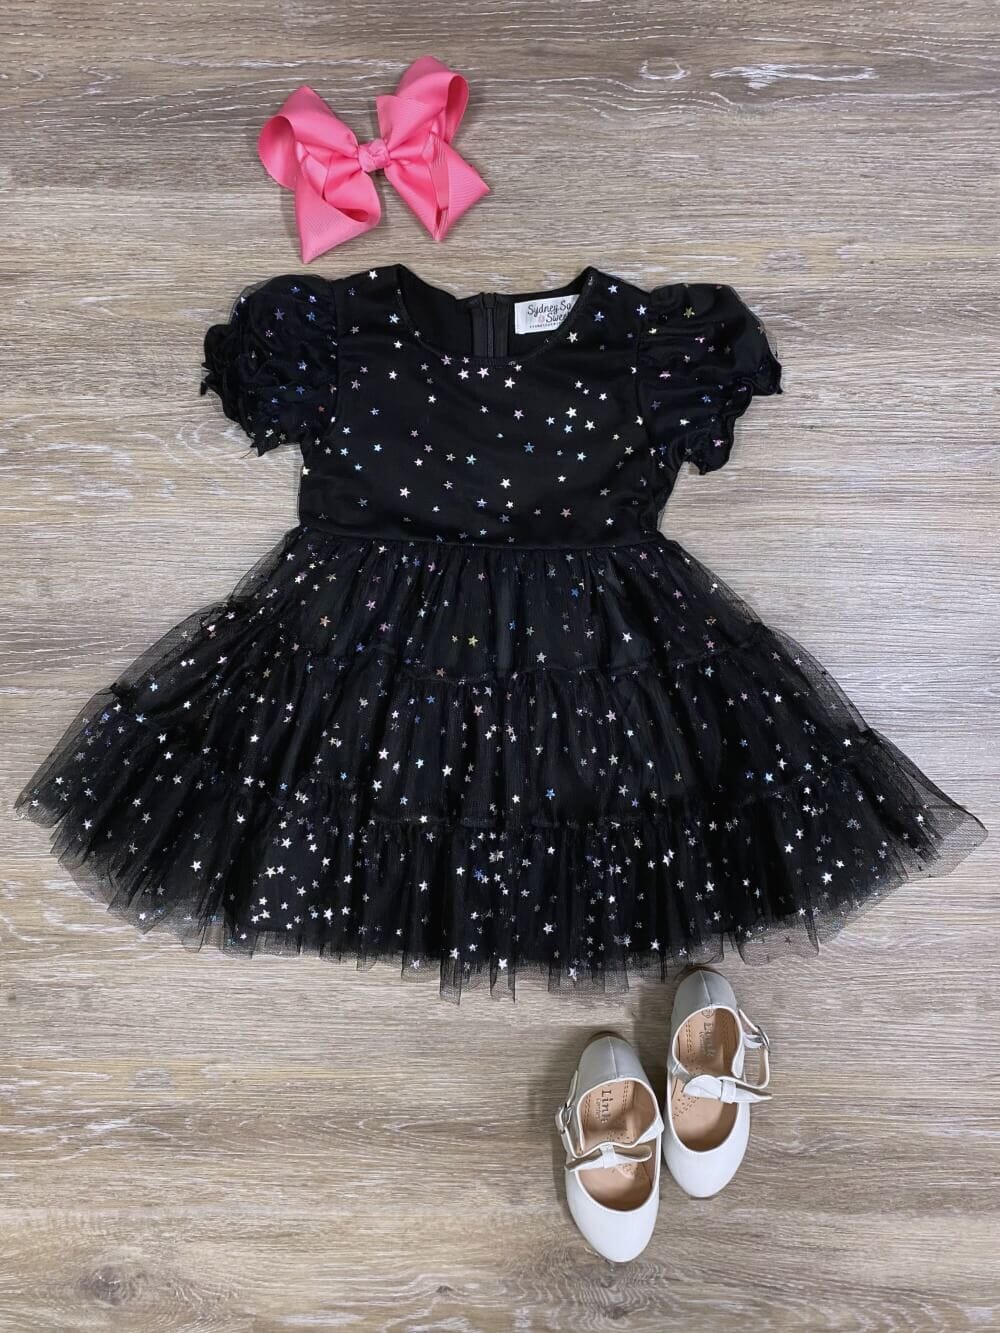 Girls Night Out Black Chiffon & Stars Special Occasion Dress - Sydney So Sweet